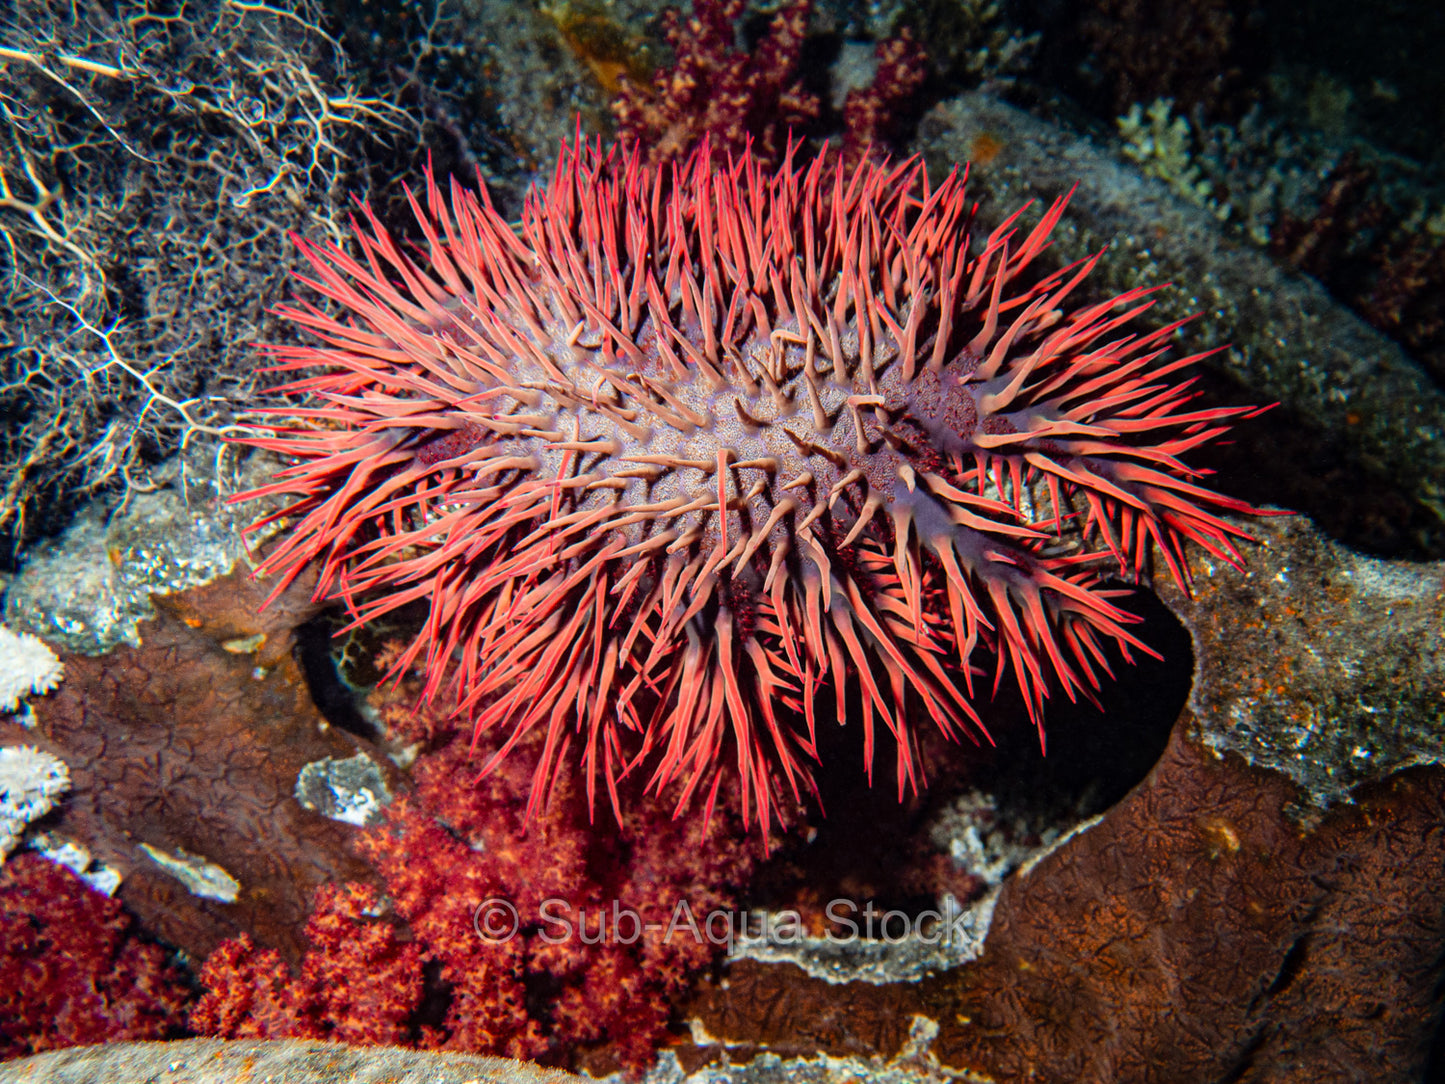 A red coloured crown-of-thorns starfish (Acanthaster planci).